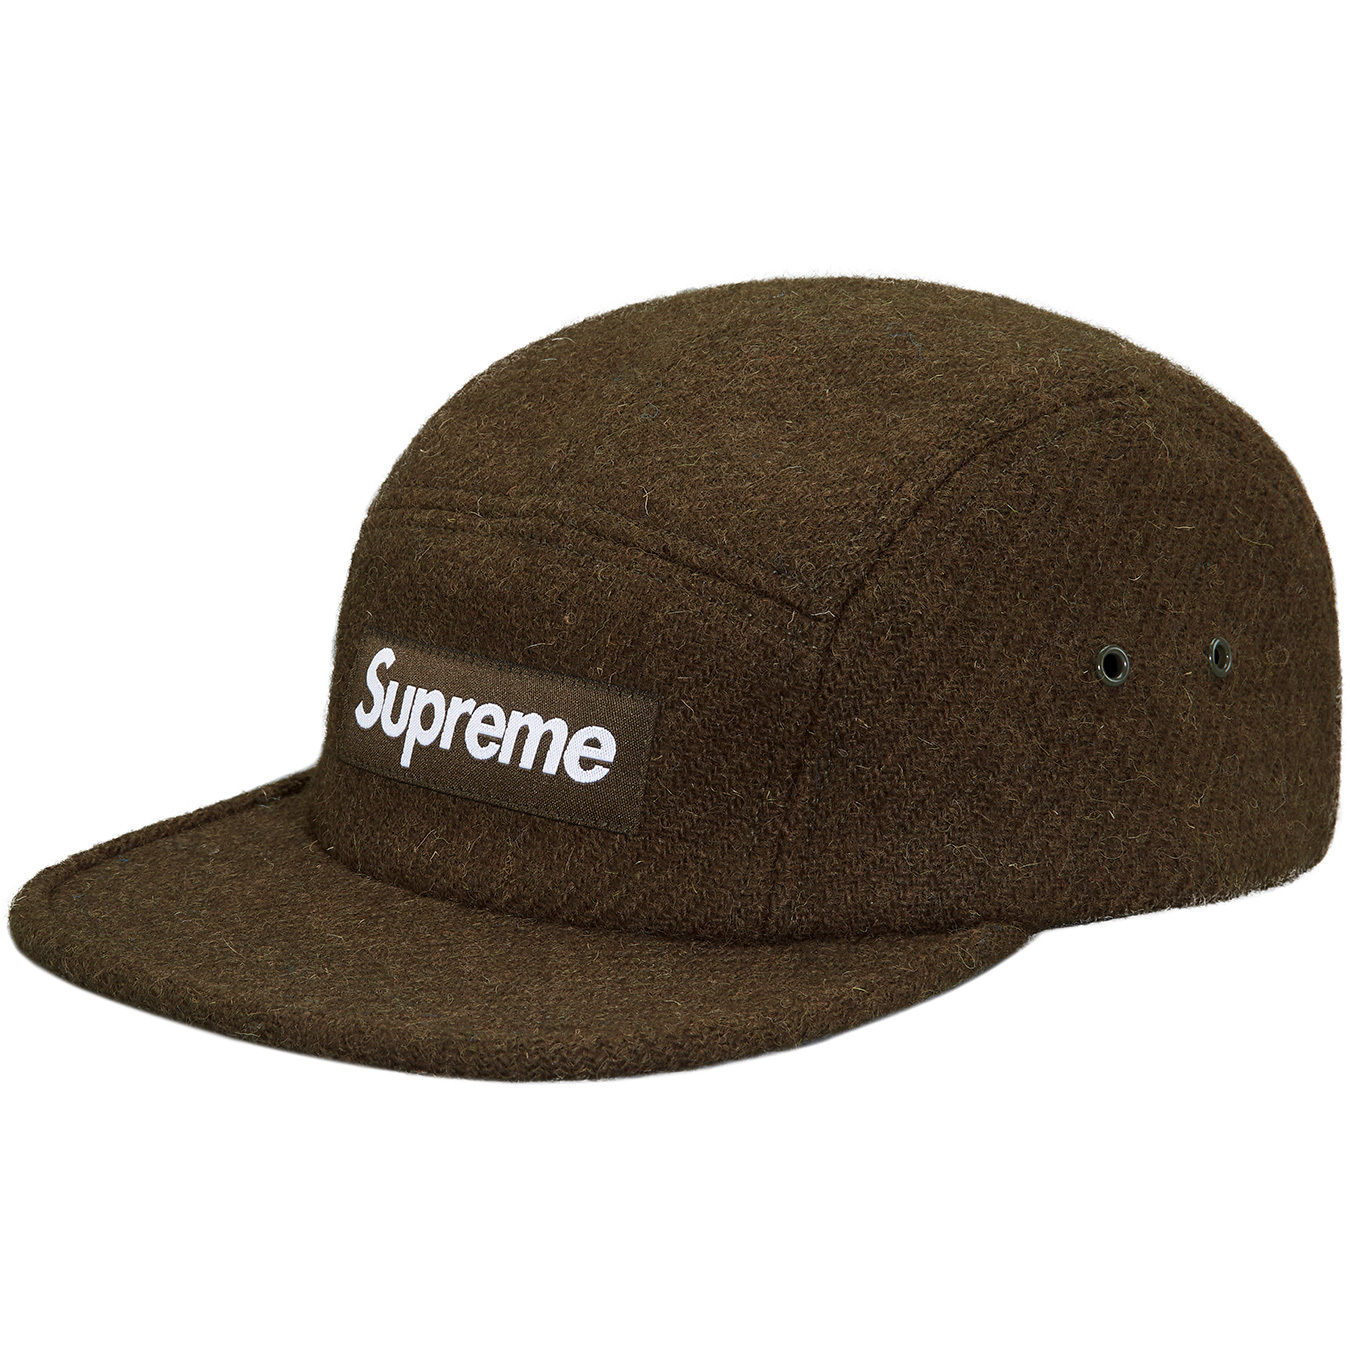 Supreme Featherweight Wool Camp Cap Brown - FW16 - US